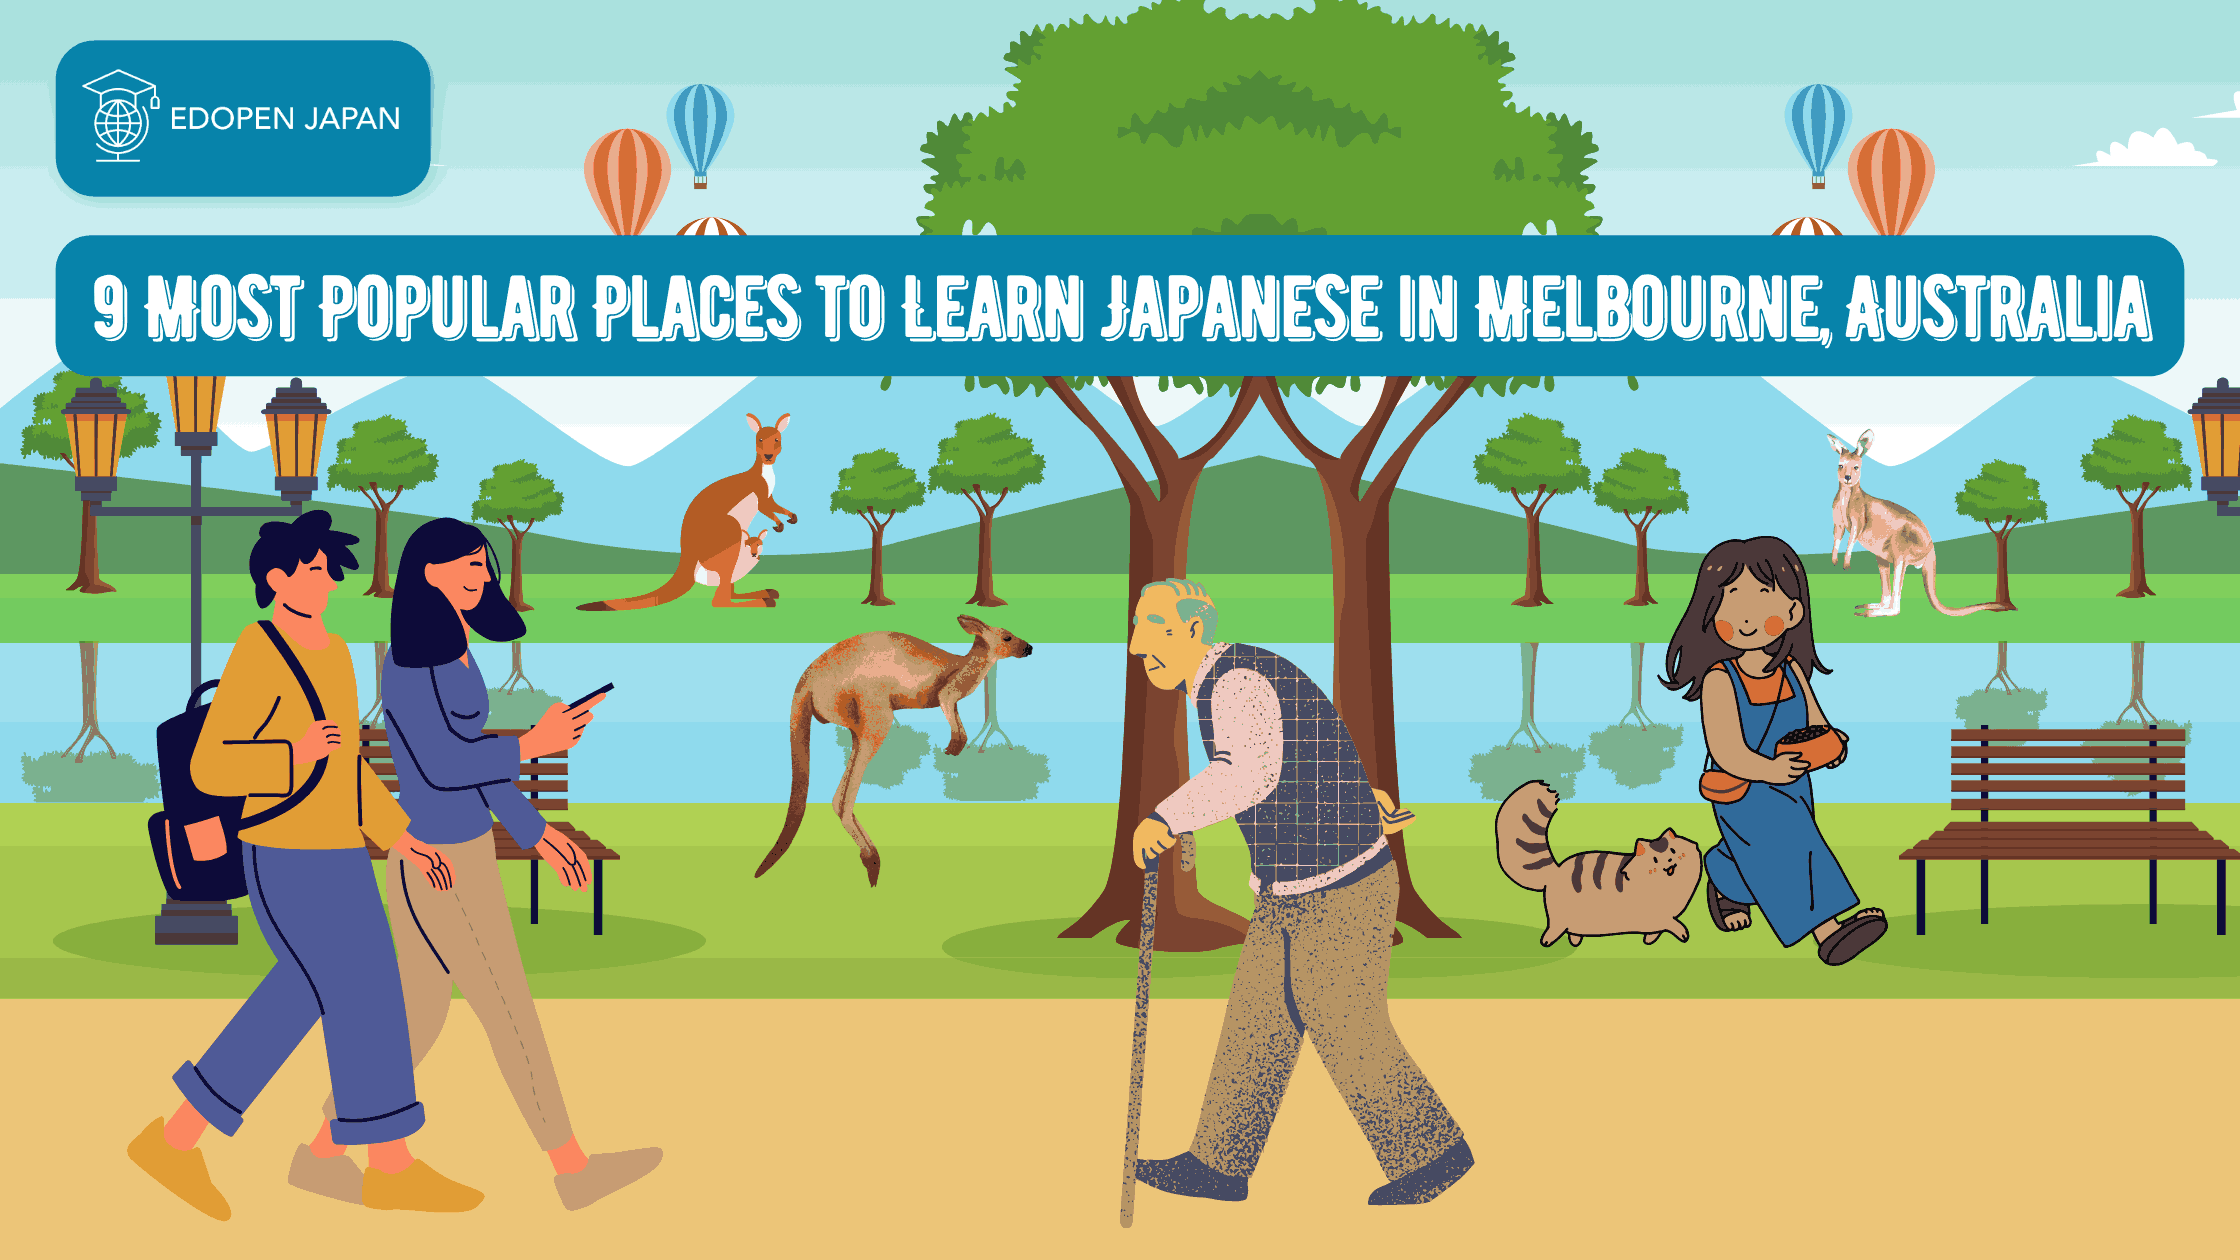 9 Most Popular Places to Learn Japanese in Melbourne, Australia - EDOPEN Japan